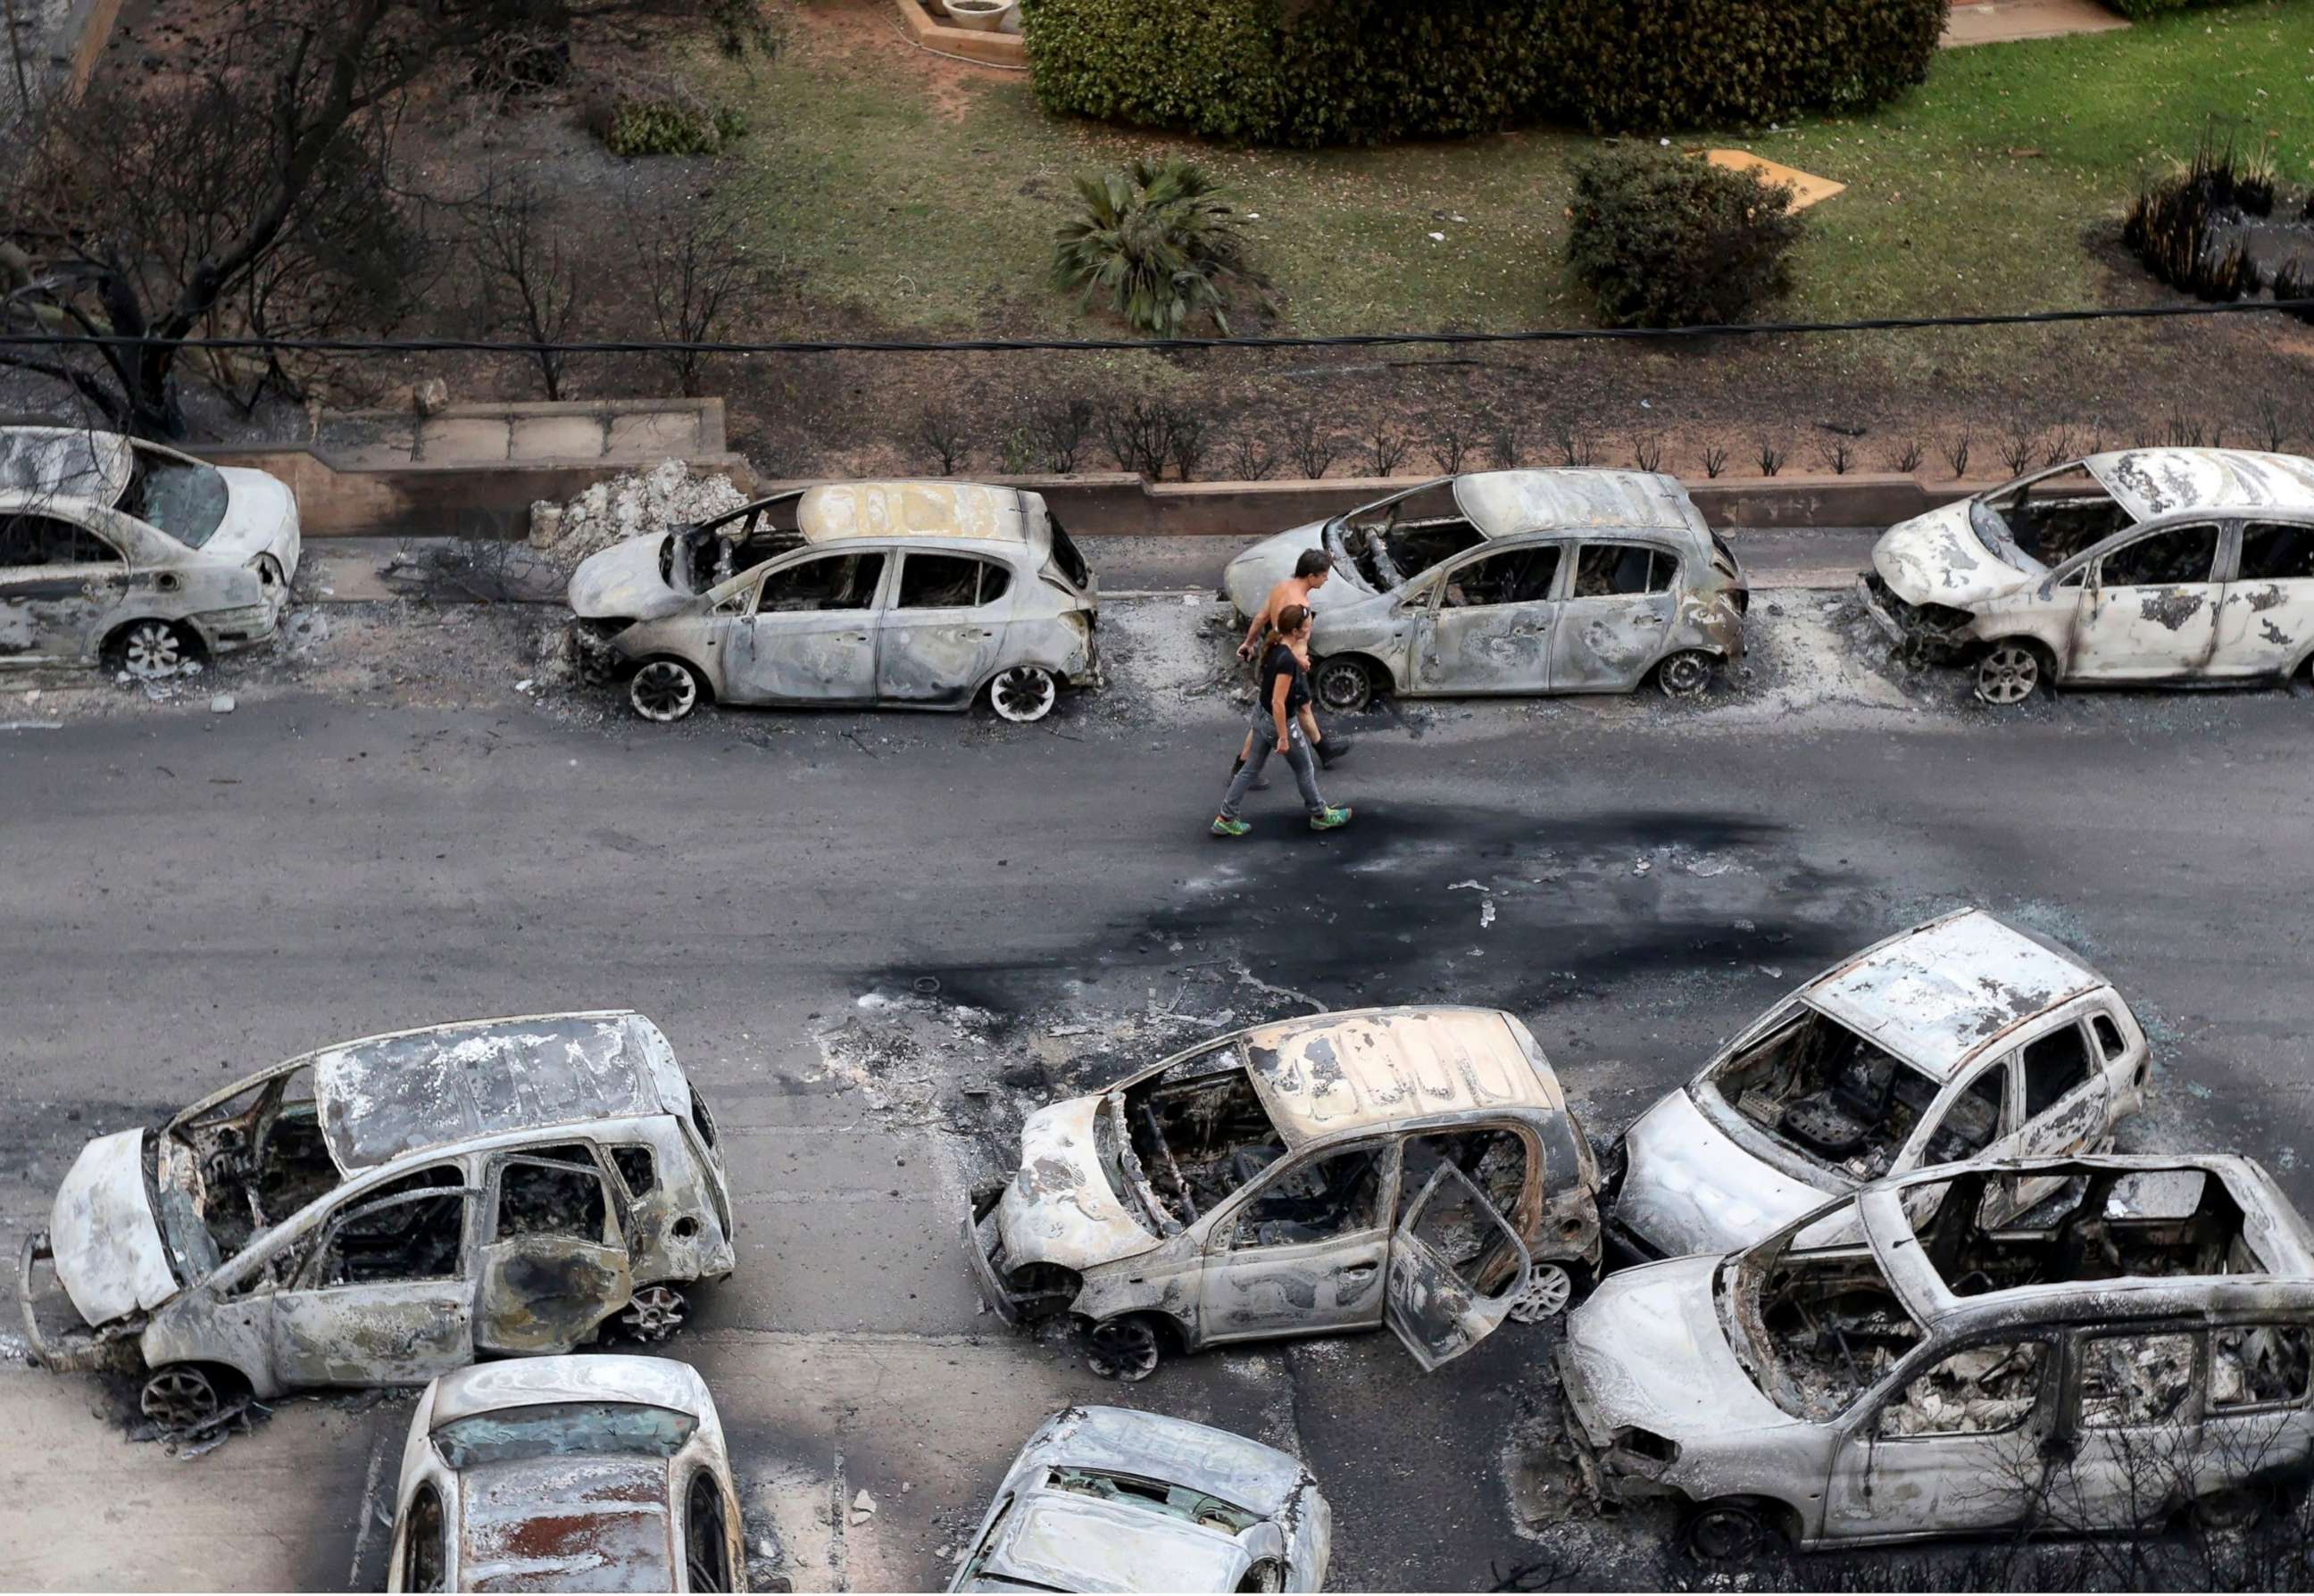 PHOTO: Dozens of cars destroyed by the blaze in the Mati area, Kokkino Limanaki  in Greece, July 24, 2018.